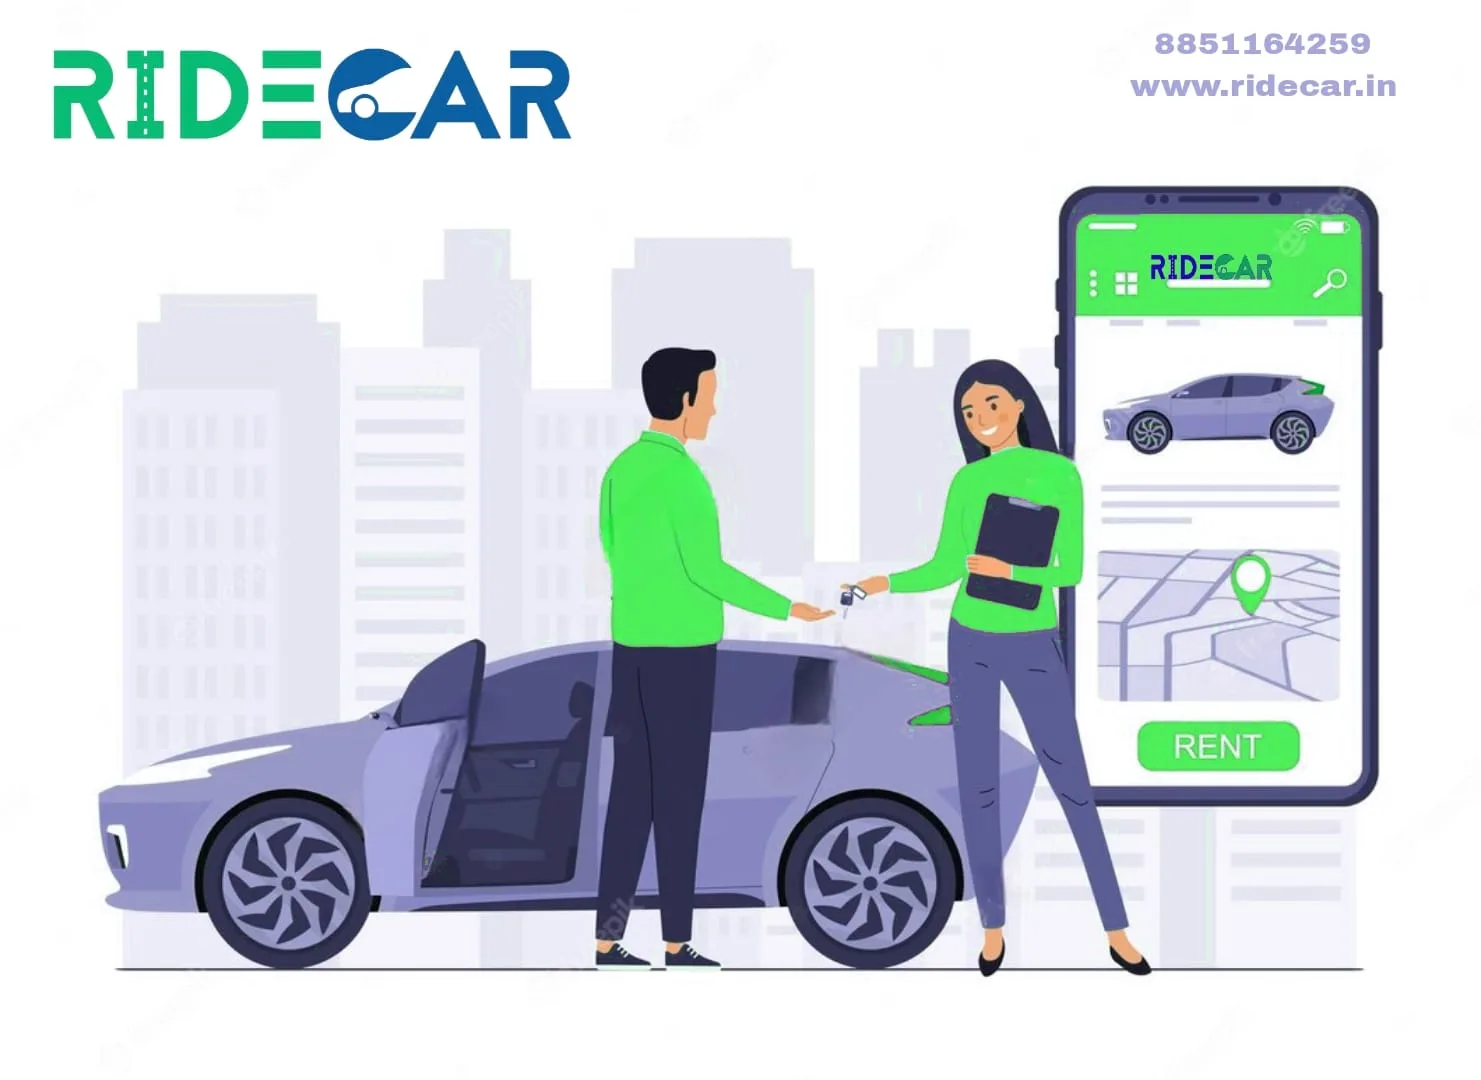 “Ridecar Self Drive Car Rental Is going to expand 1000+ Cars In Car Sharing Host Program, Pioneering the Future of Car Sharing”